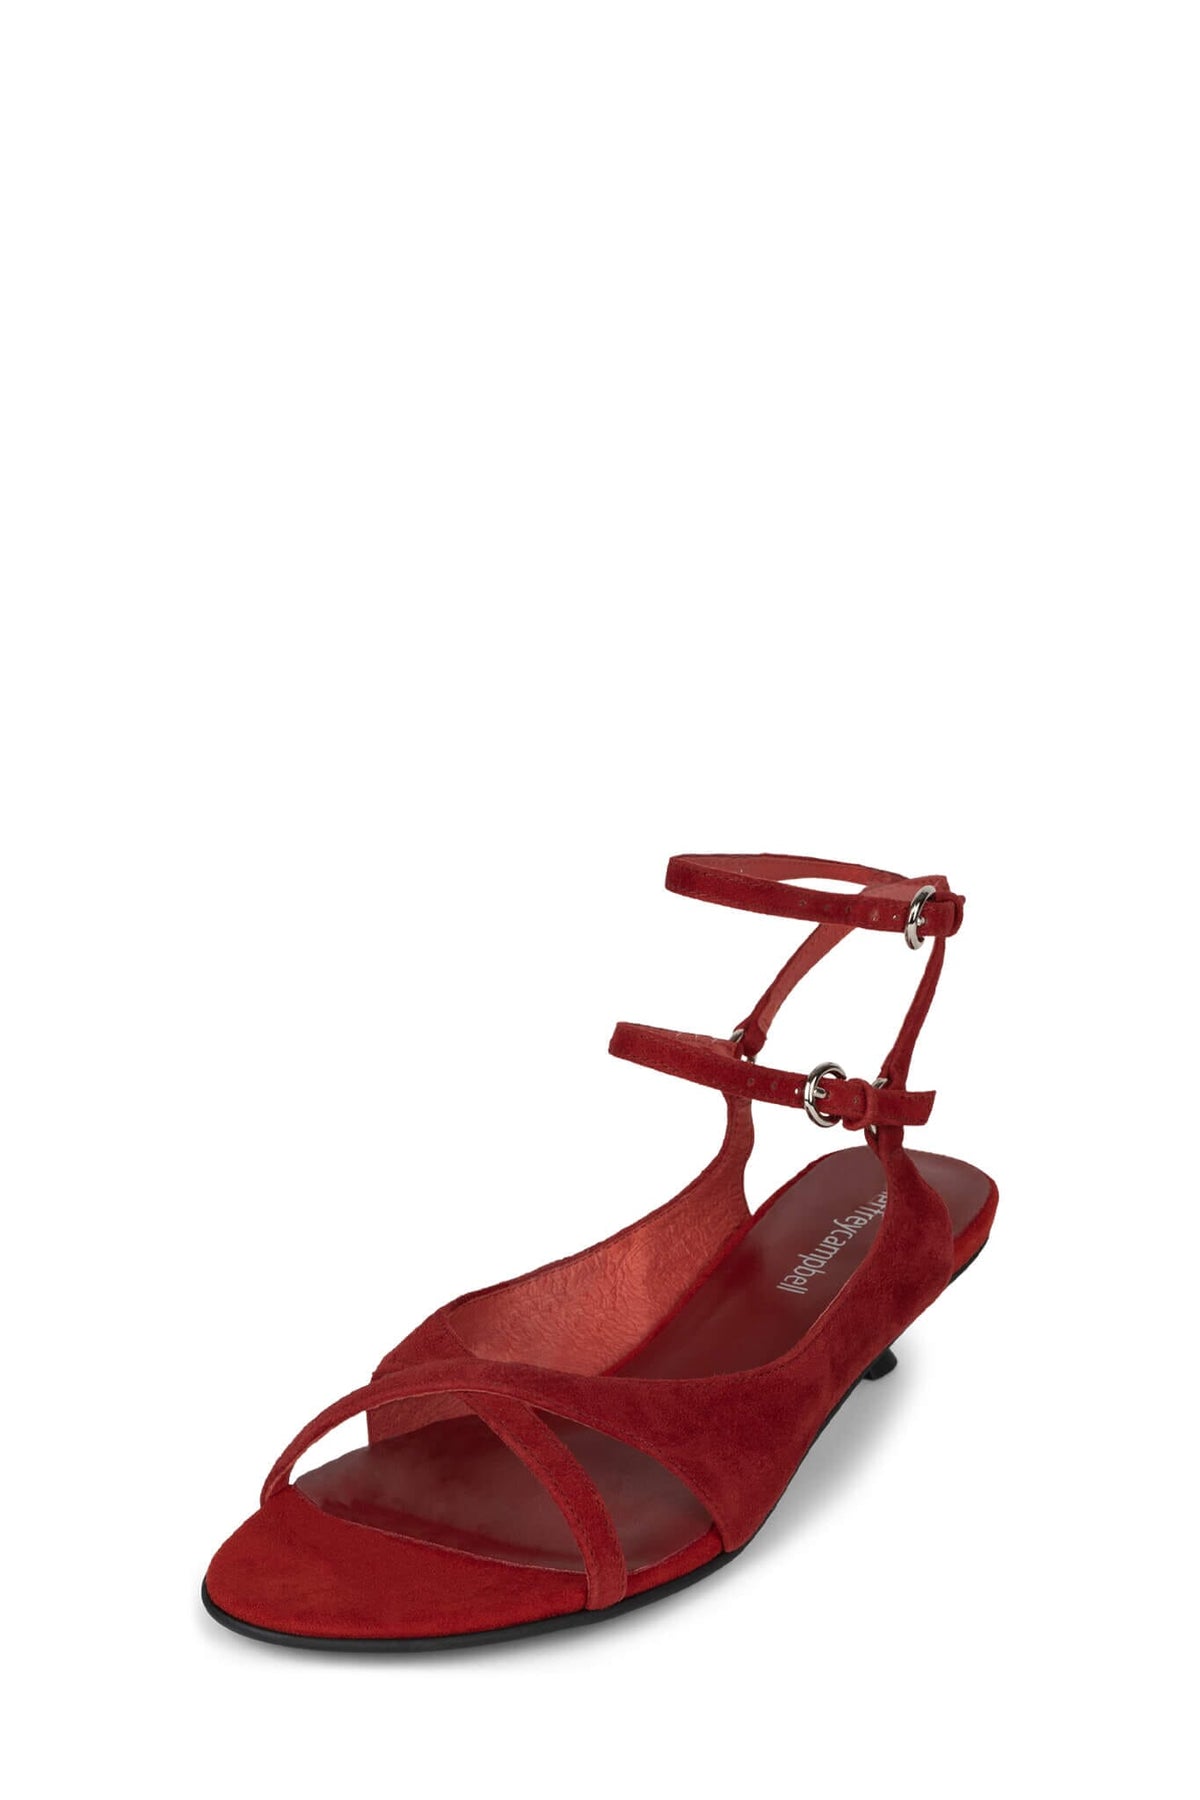 MISTIE Jeffrey Campbell Strappy Sandals Dusty Red Suede